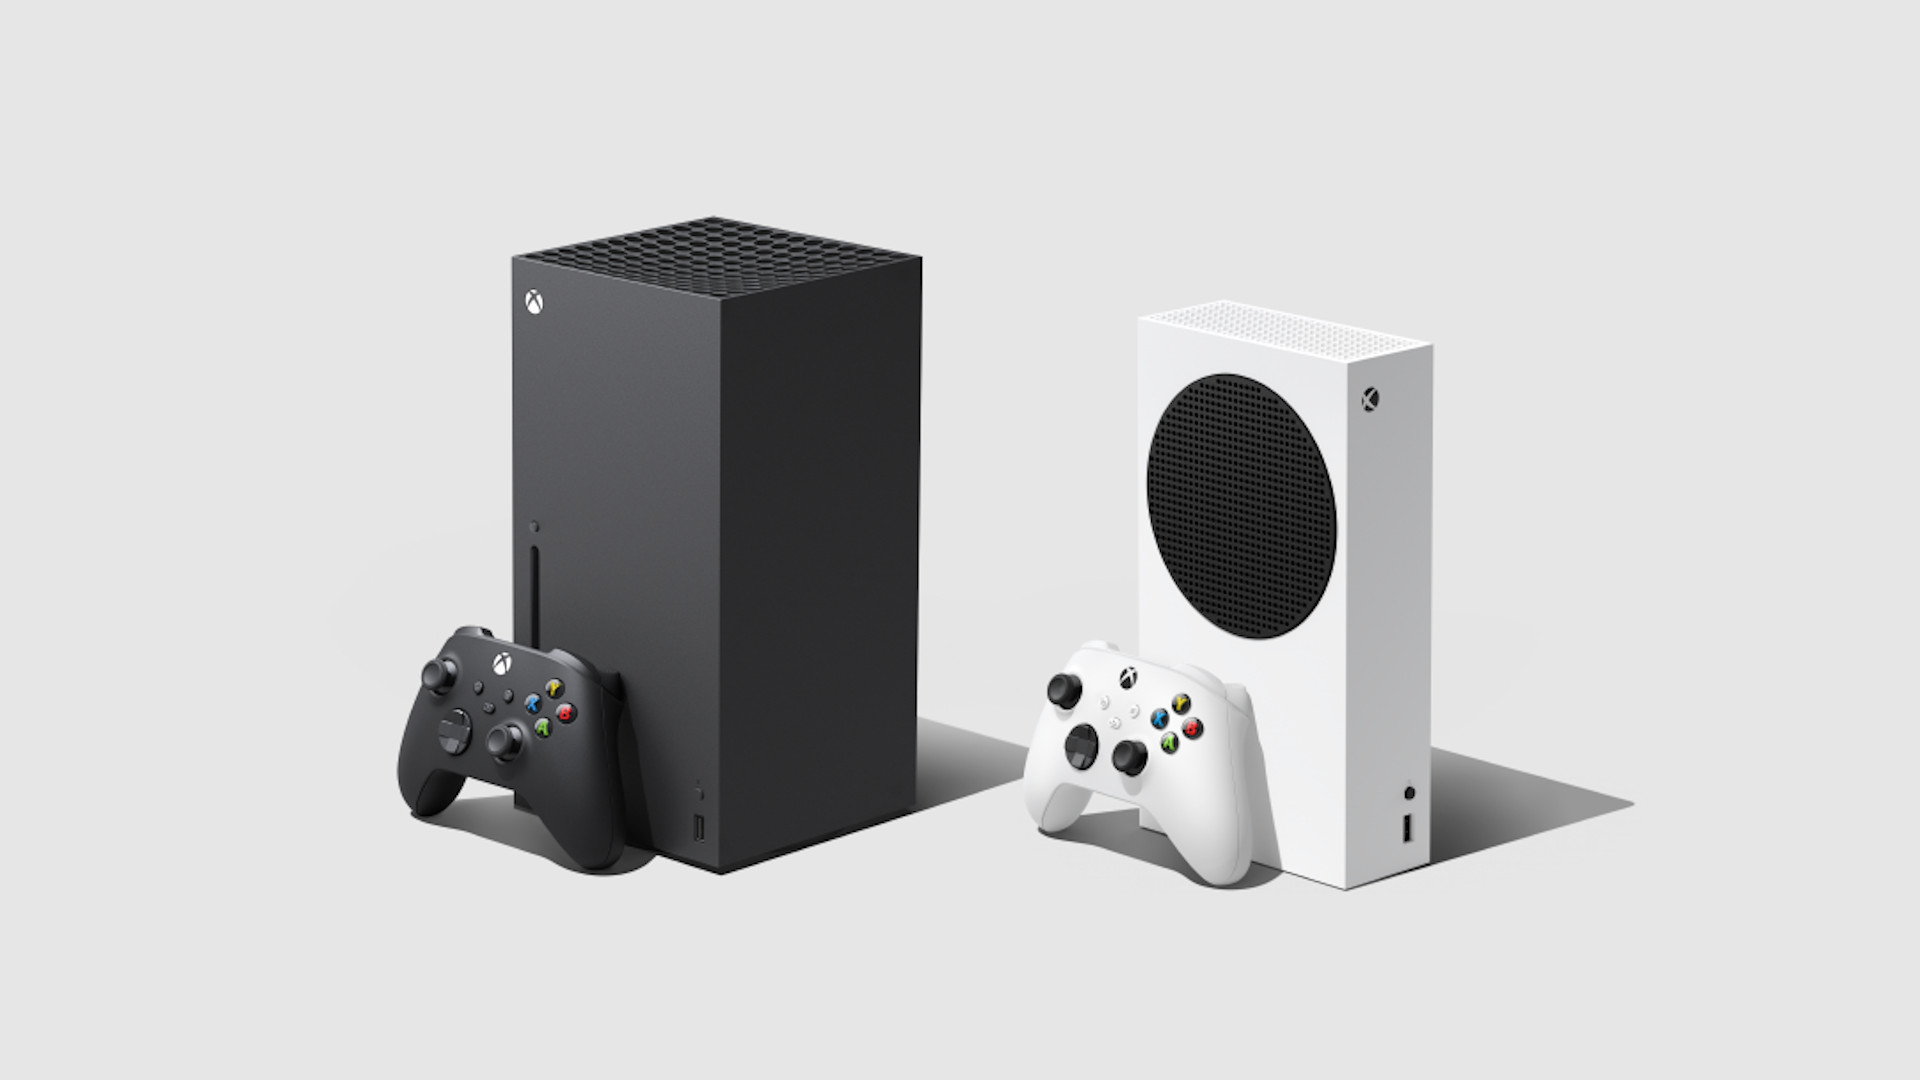 Xbox Series X|S setup: Xbox Series X and S consoles and their respective controllers placed on a white background.